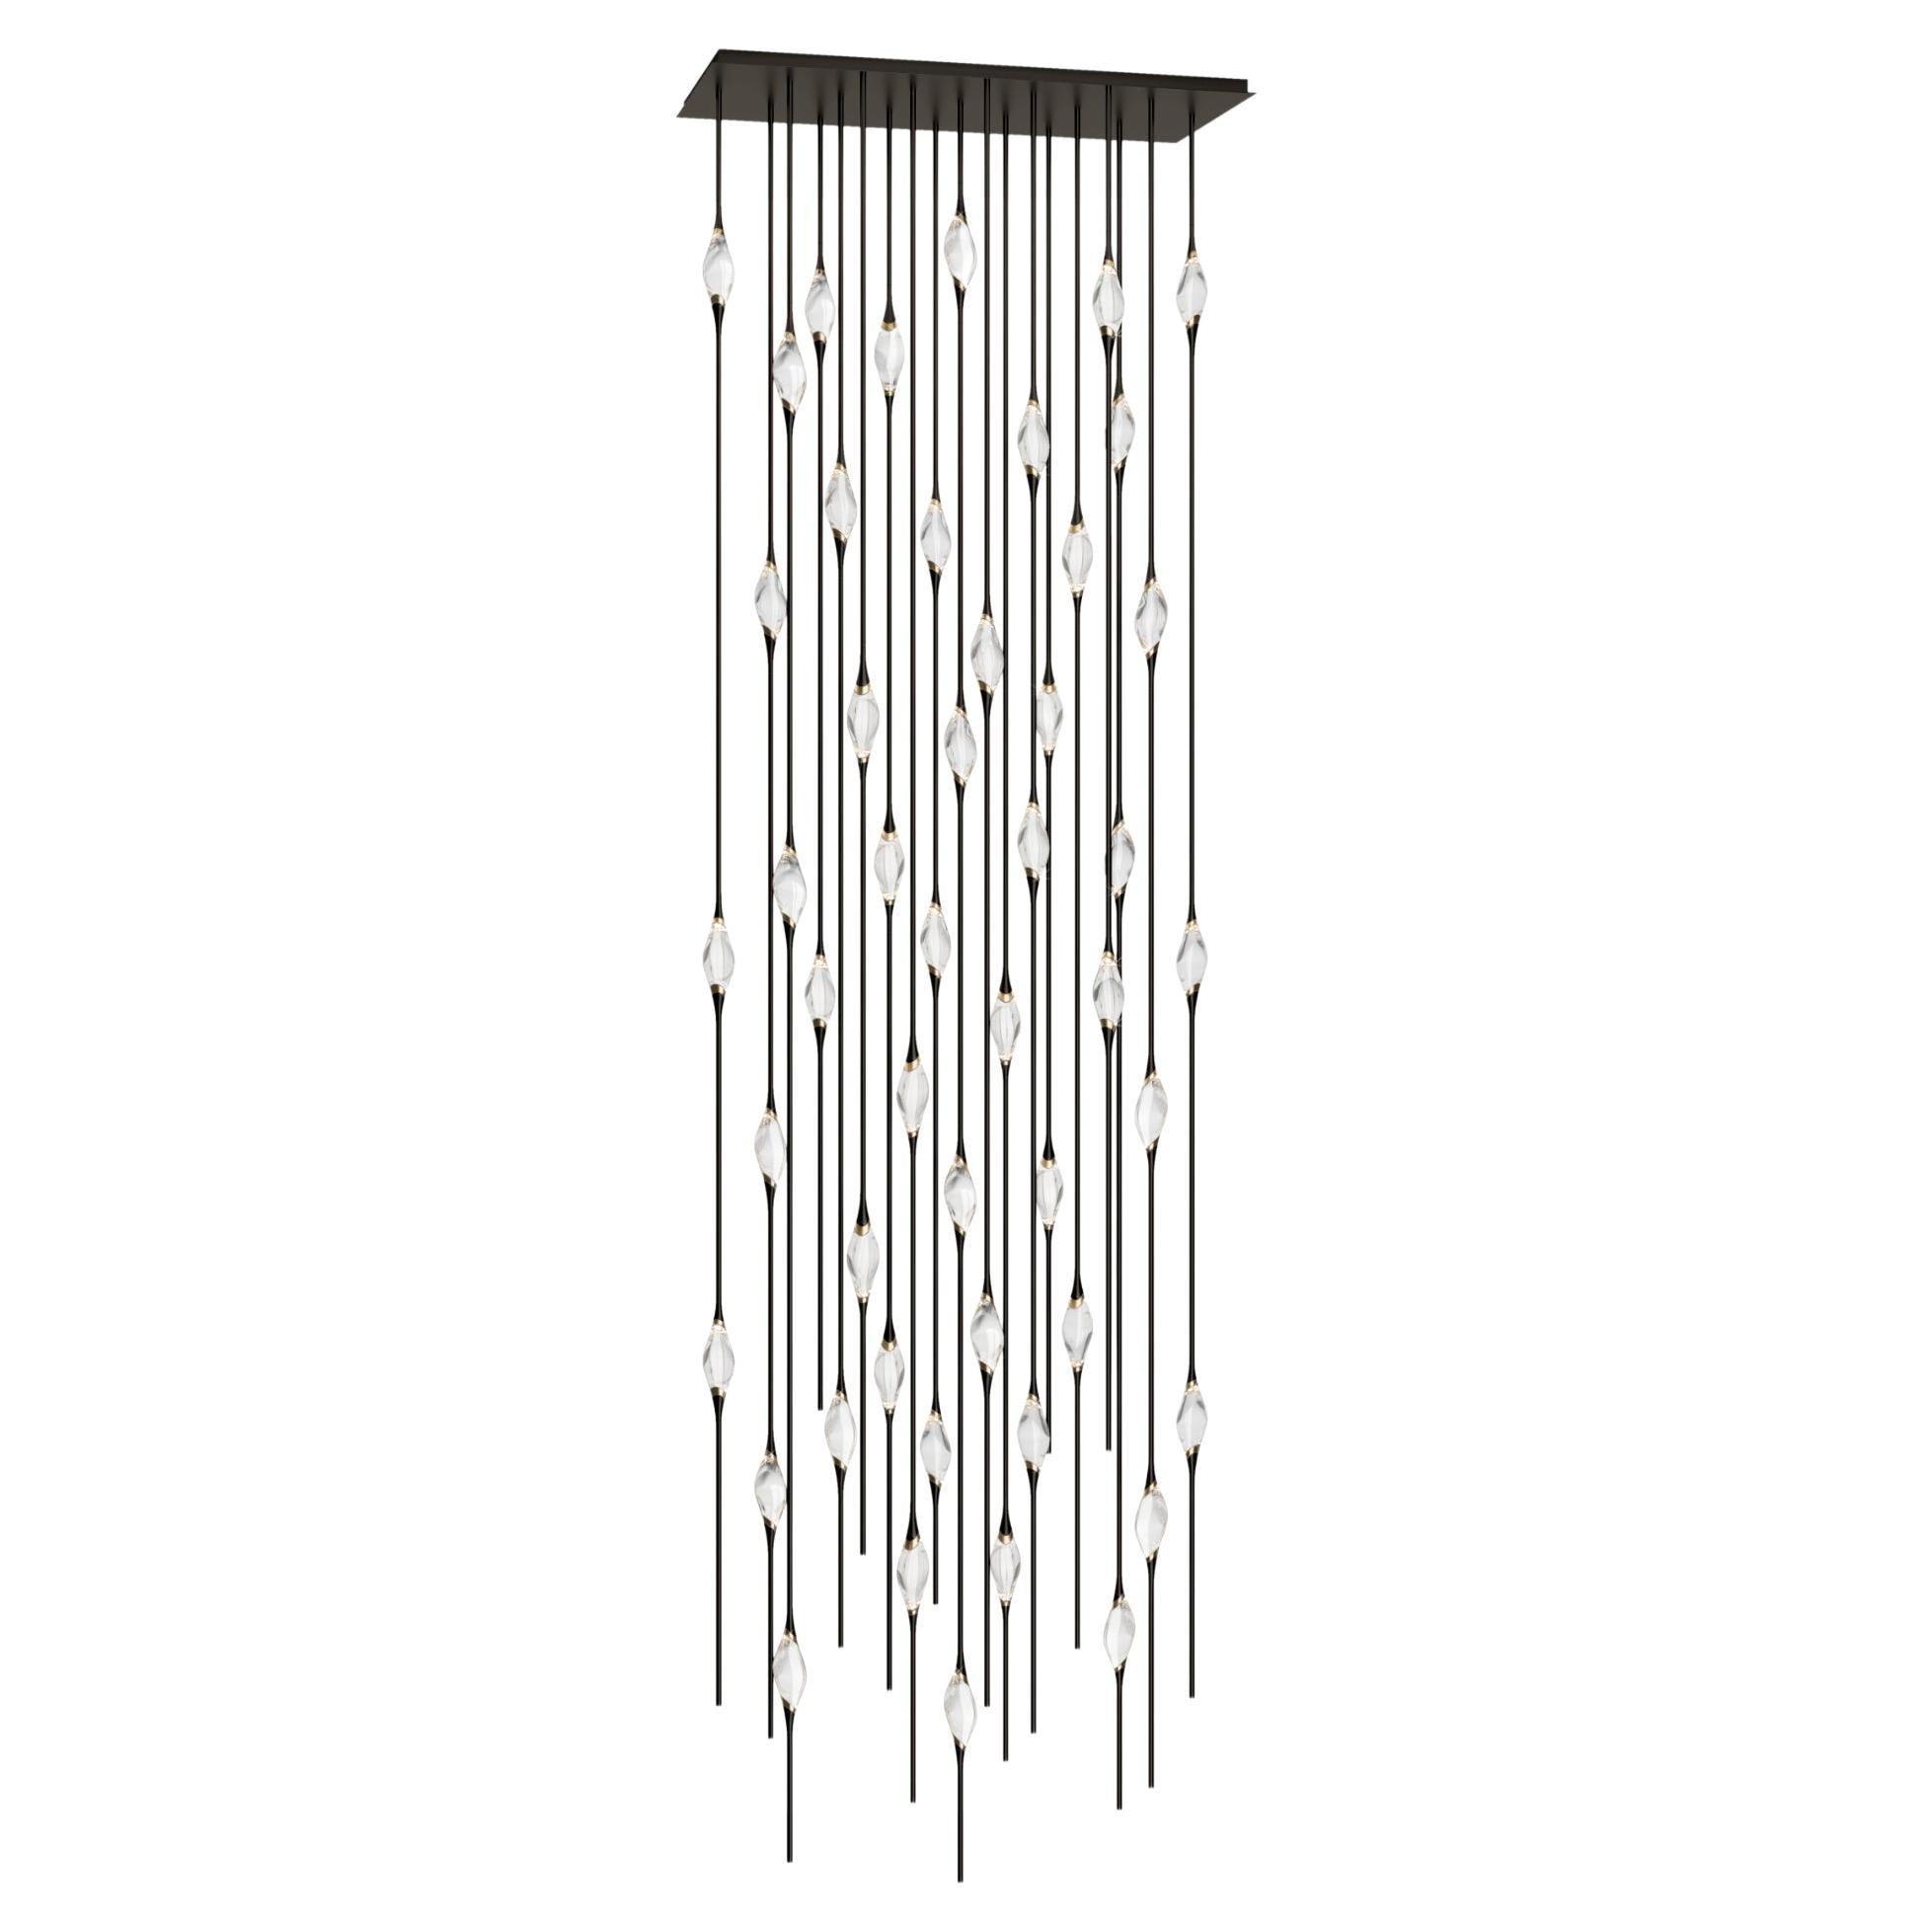 "Il Pezzo 12 Cluster Chandelier" - height 500cm/197" - black and polished brass en vente